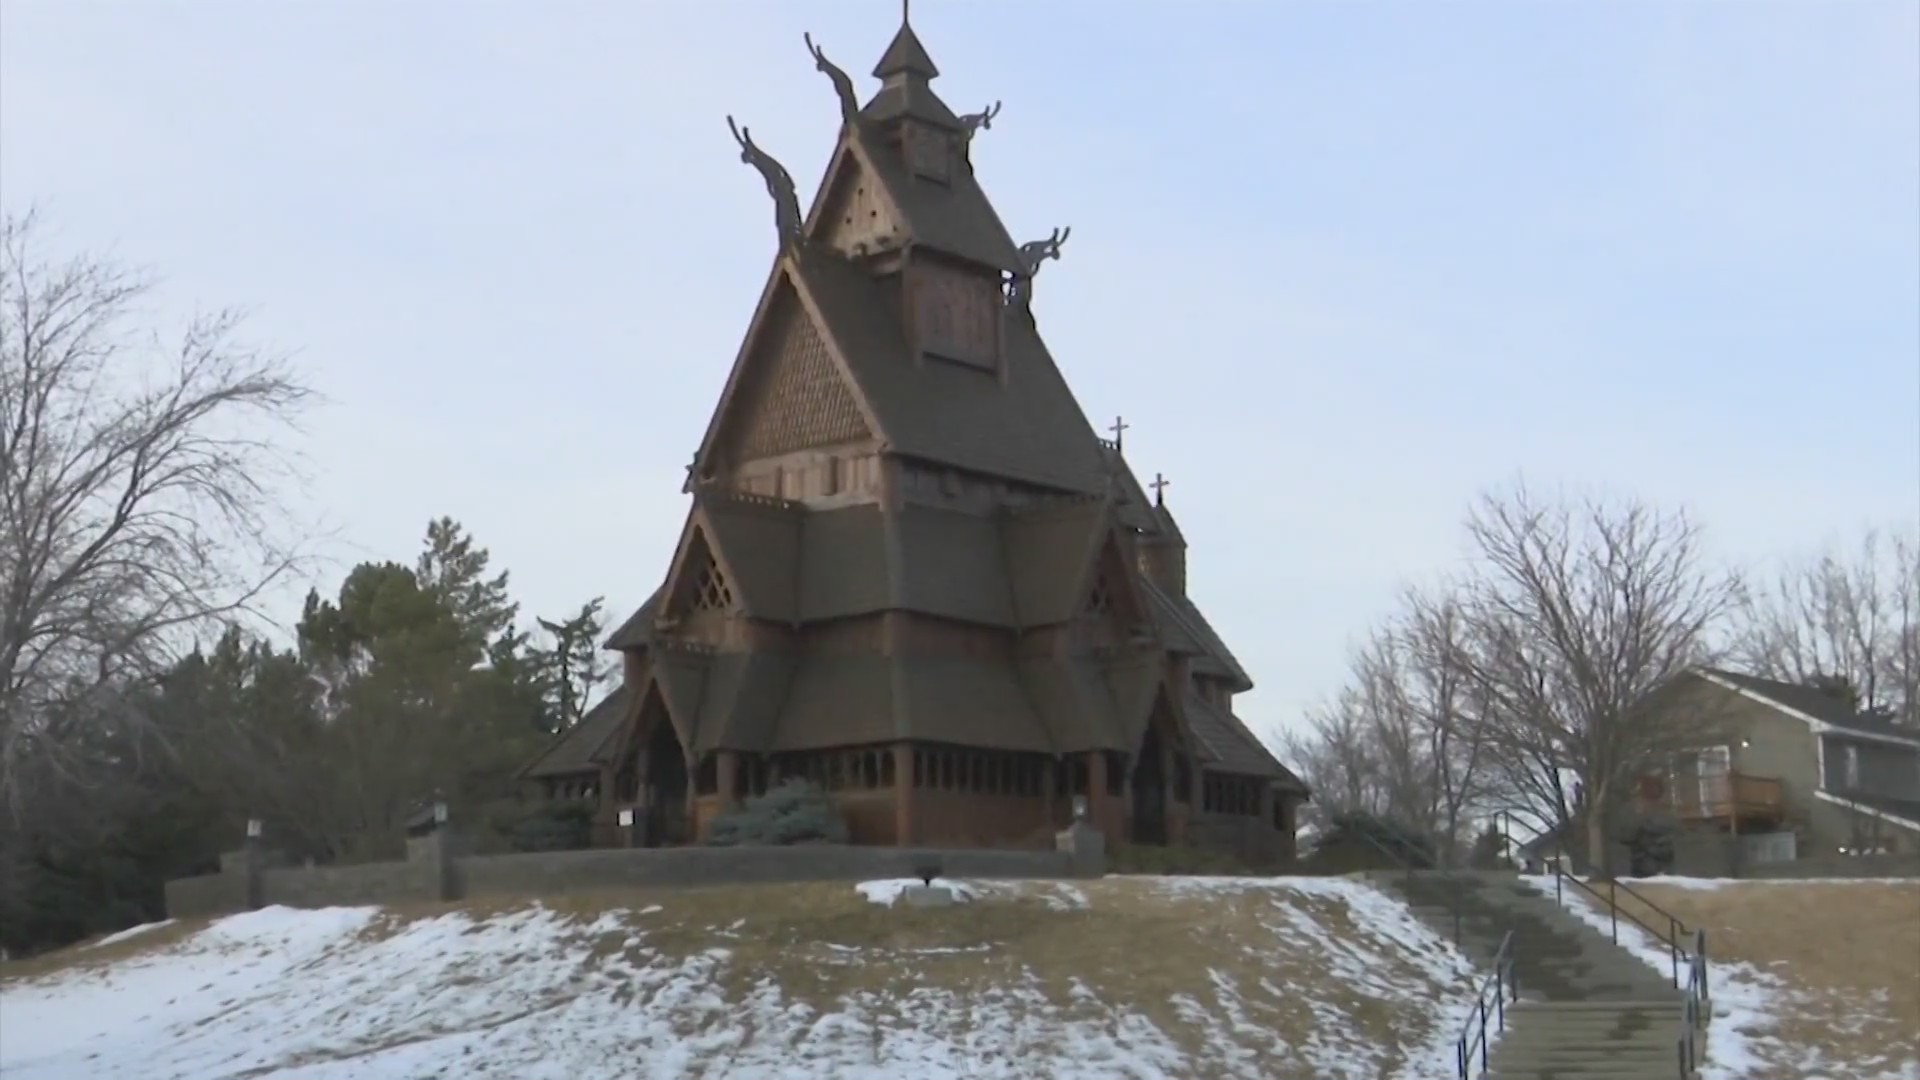 Scandinavian Heritage Association in Minot pushing to keep history alive